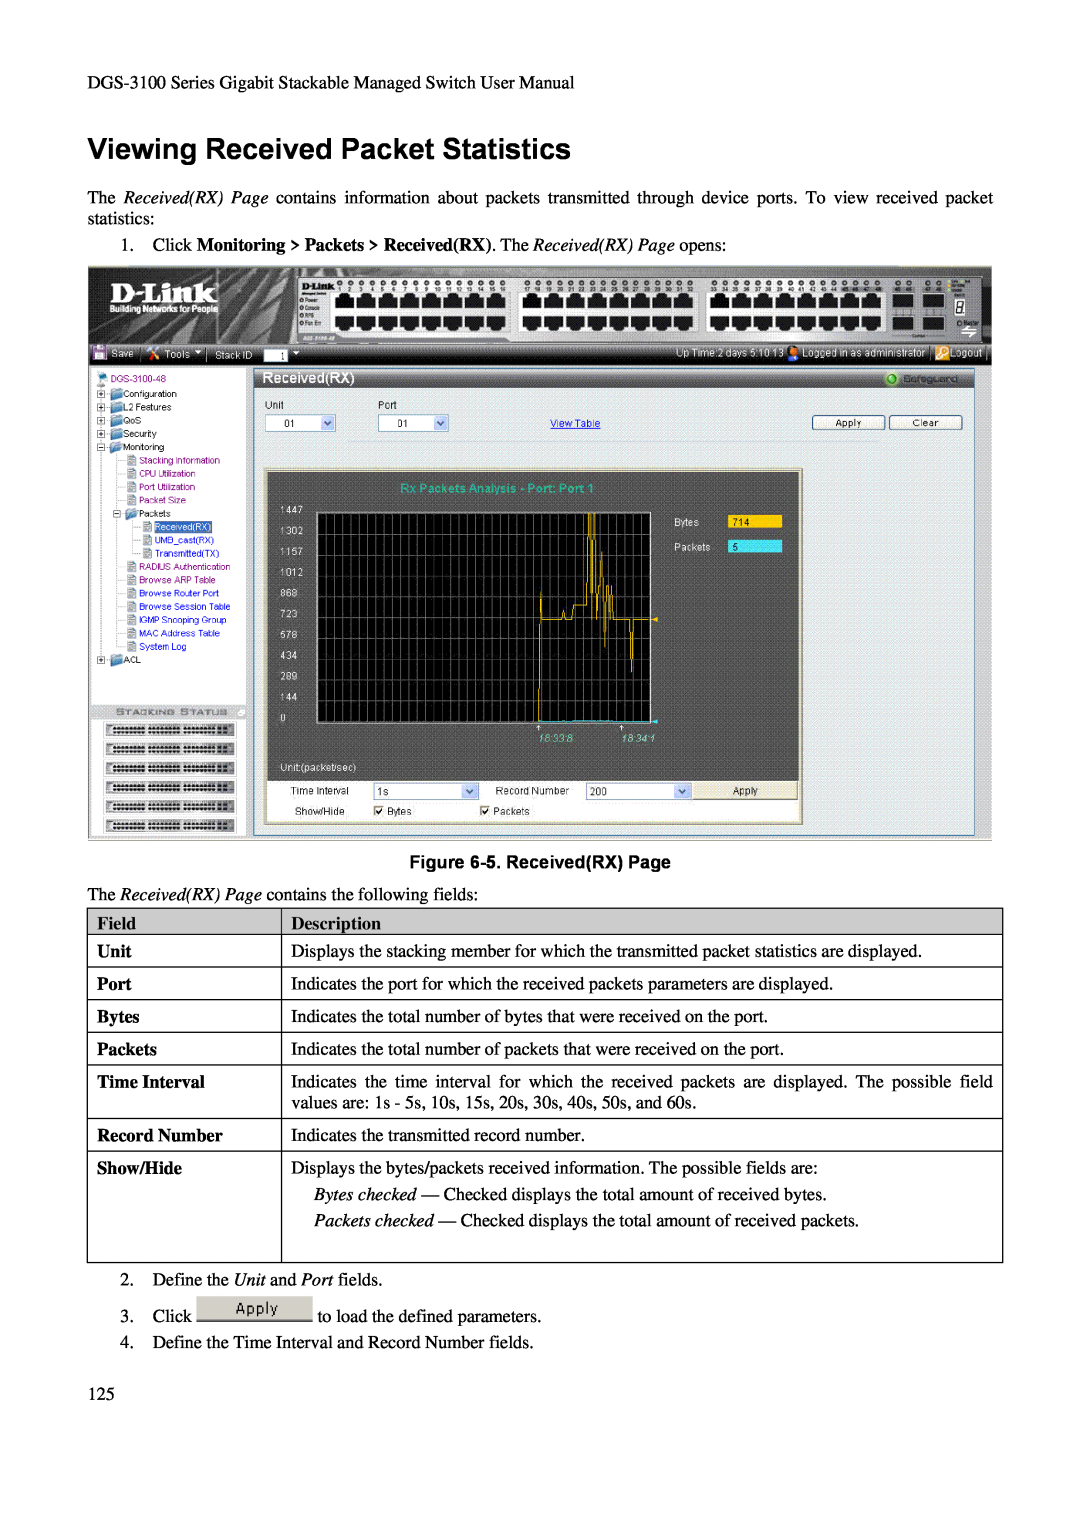 D-Link DGS-3100 Viewing Received Packet Statistics, Click Monitoring Packets ReceivedRX. The ReceivedRX Page opens 